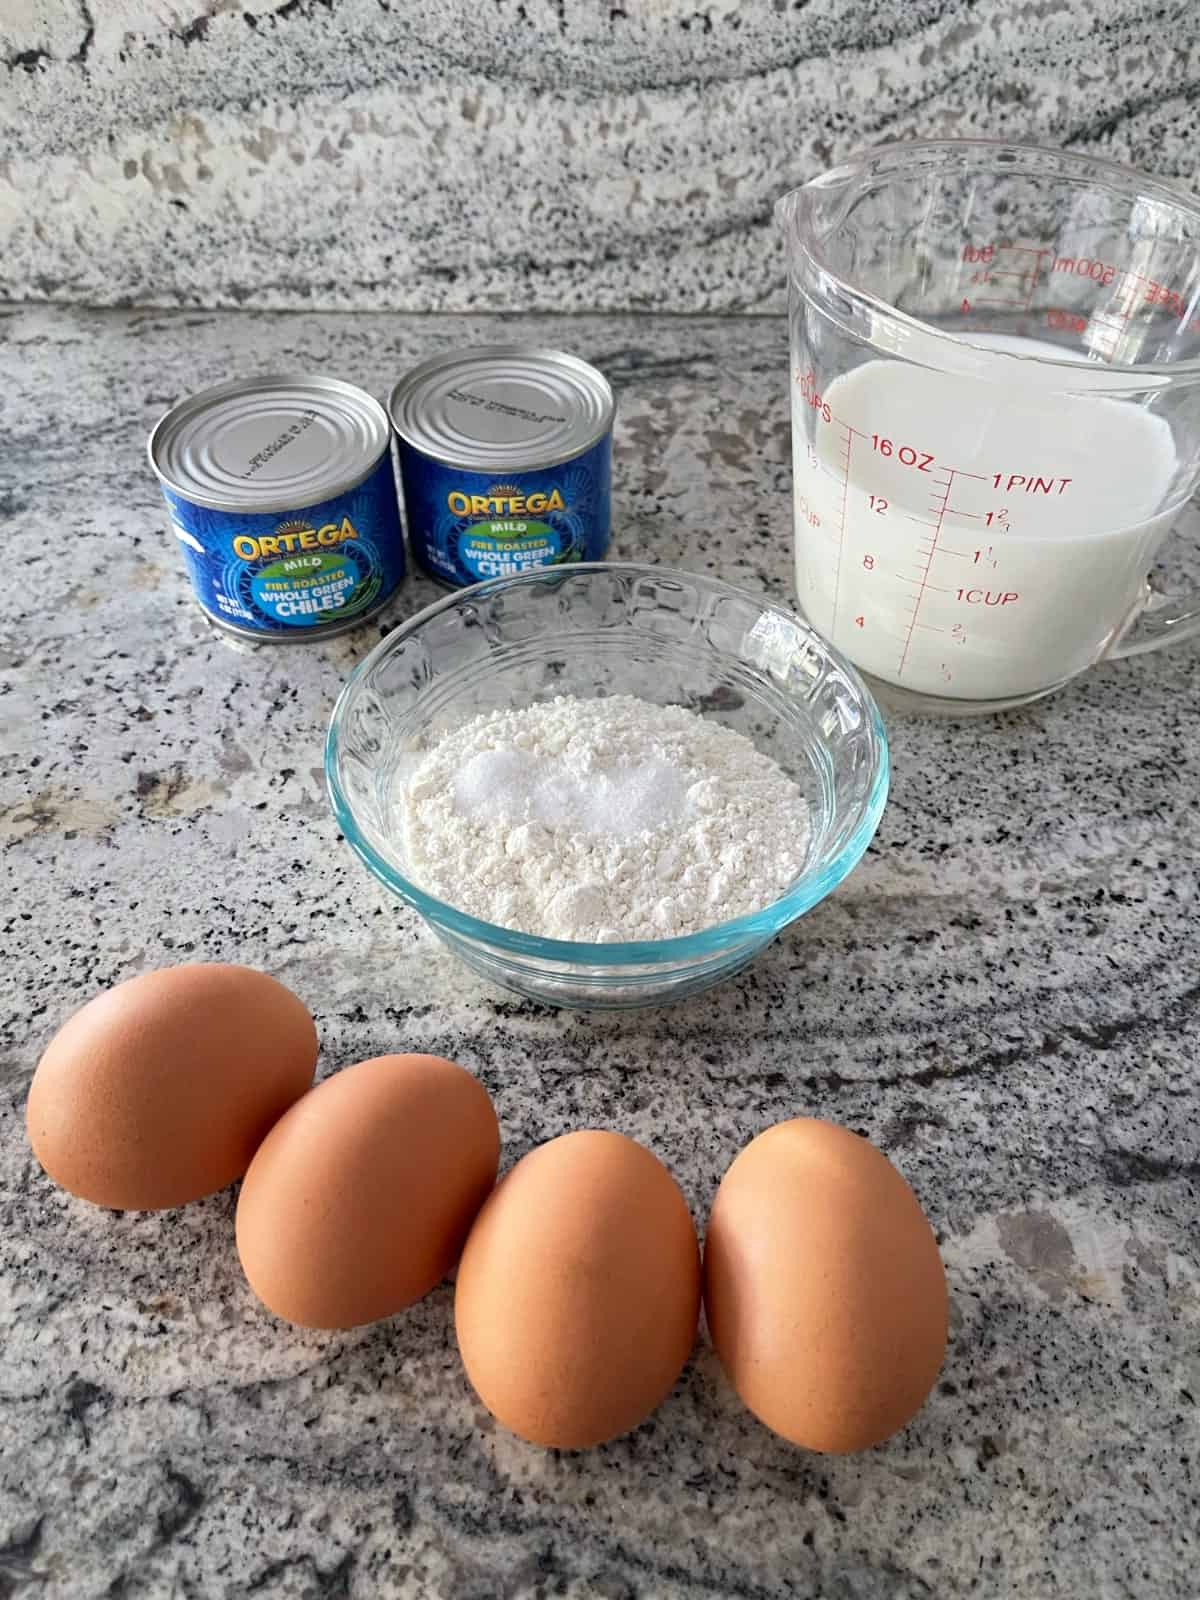 Ingredients including four eggs, two cans green chiles, unsweetened almond milk, and small glass bowl with all-purpose flour on granite.